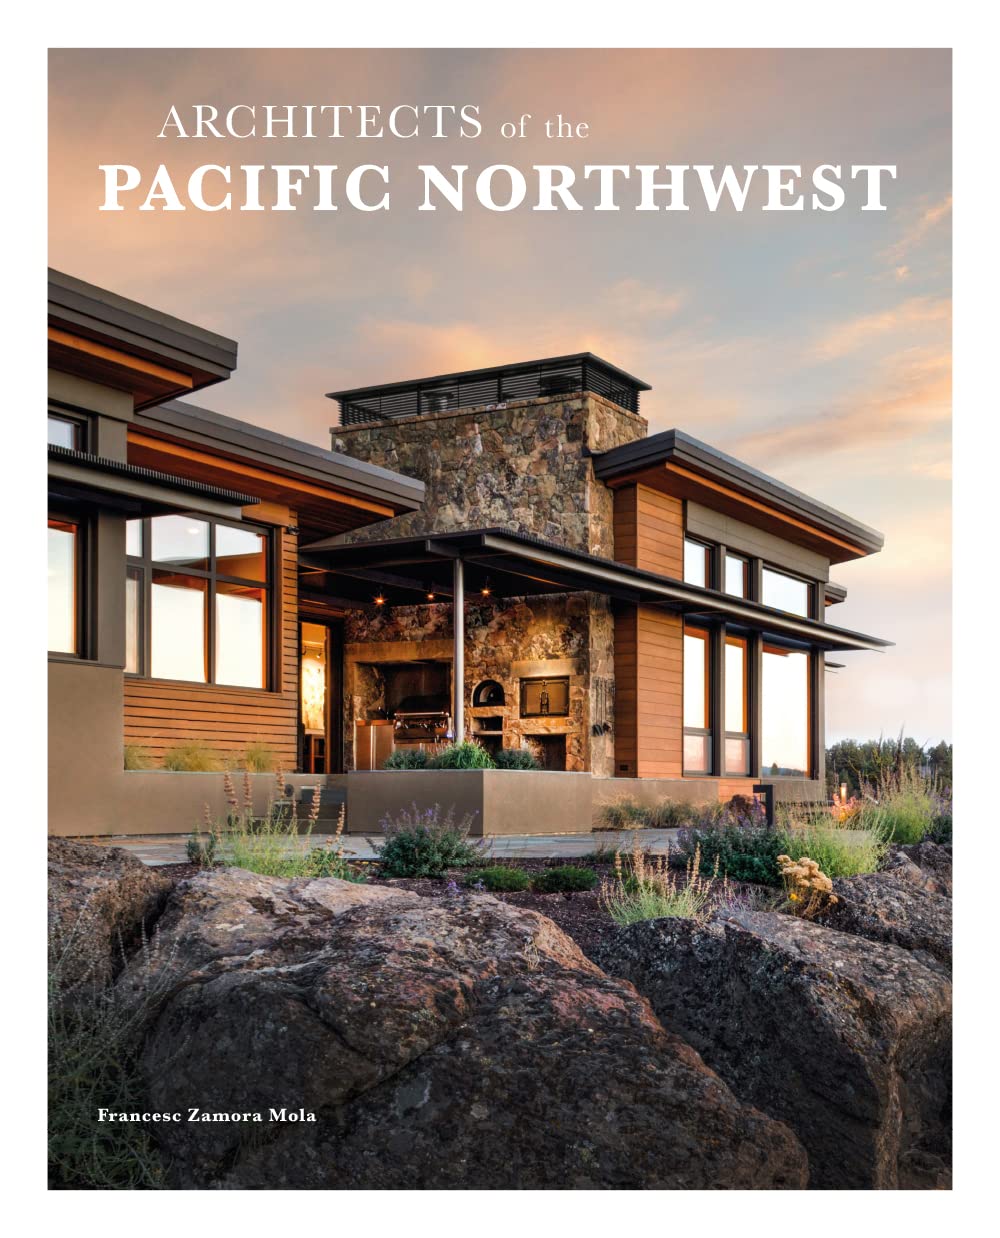 ARCHIECTS OF THE PACIFIC NORTHWEST